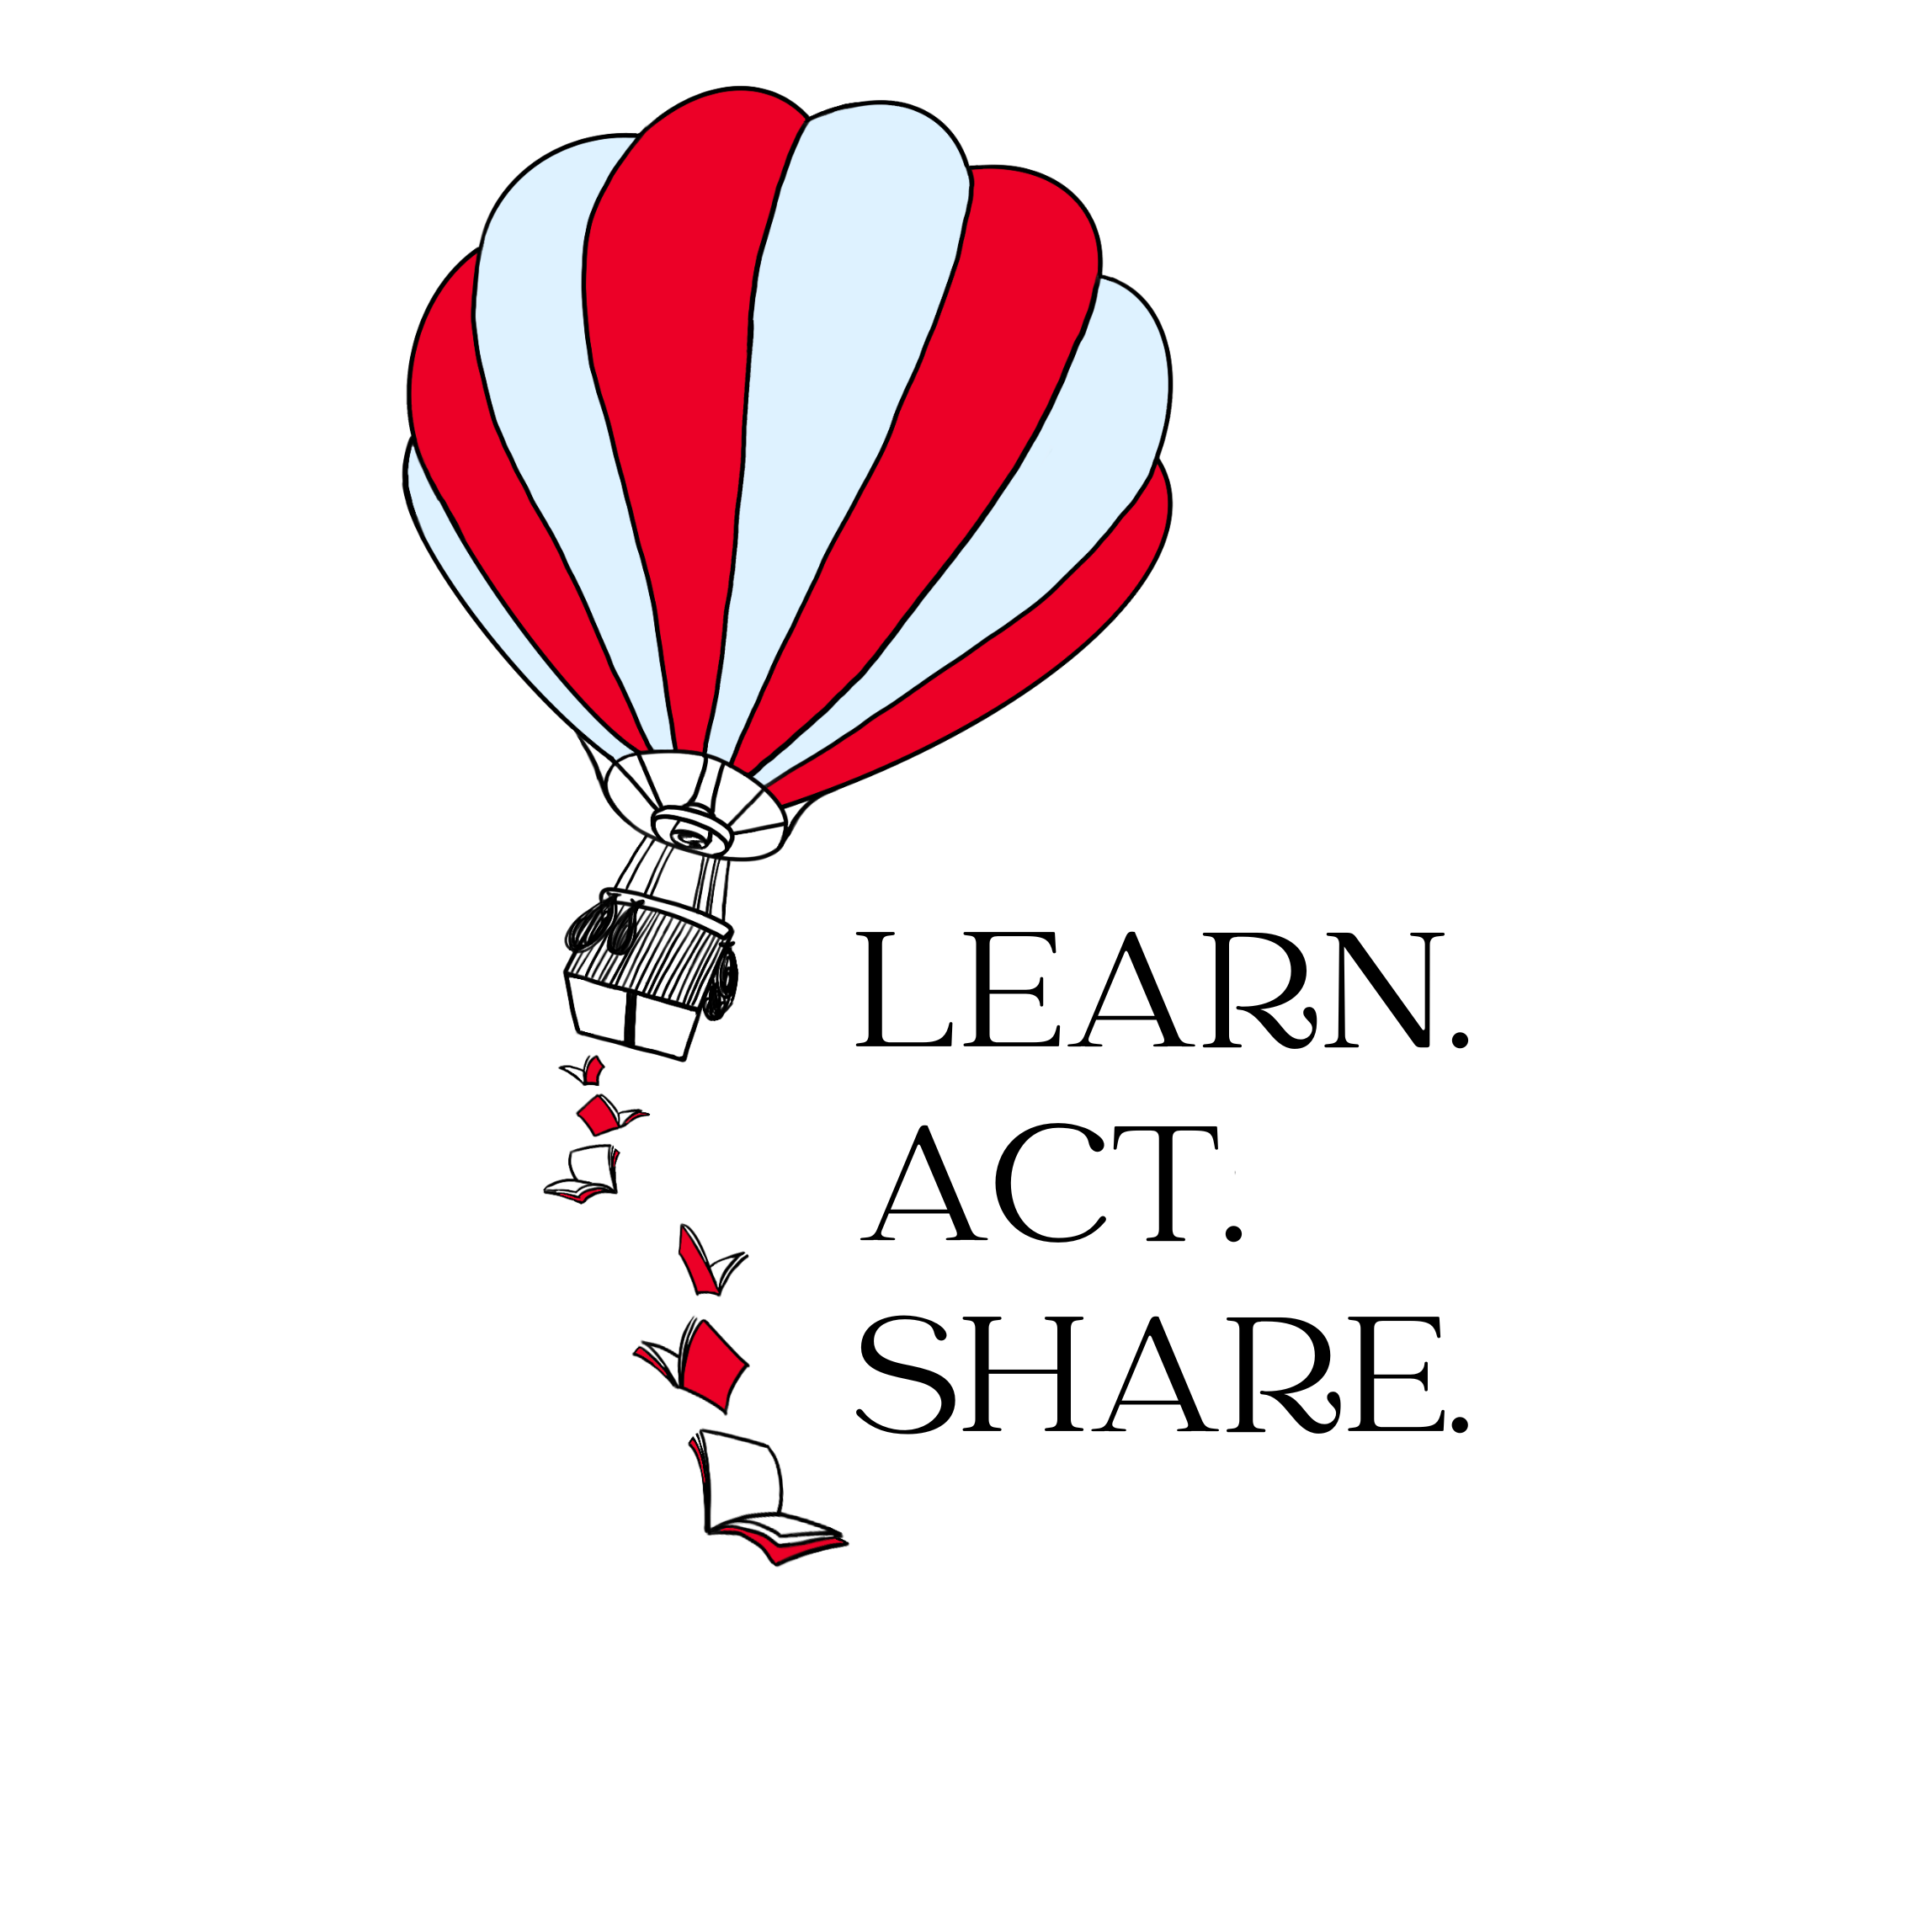 Learn. Act. Share. (6)